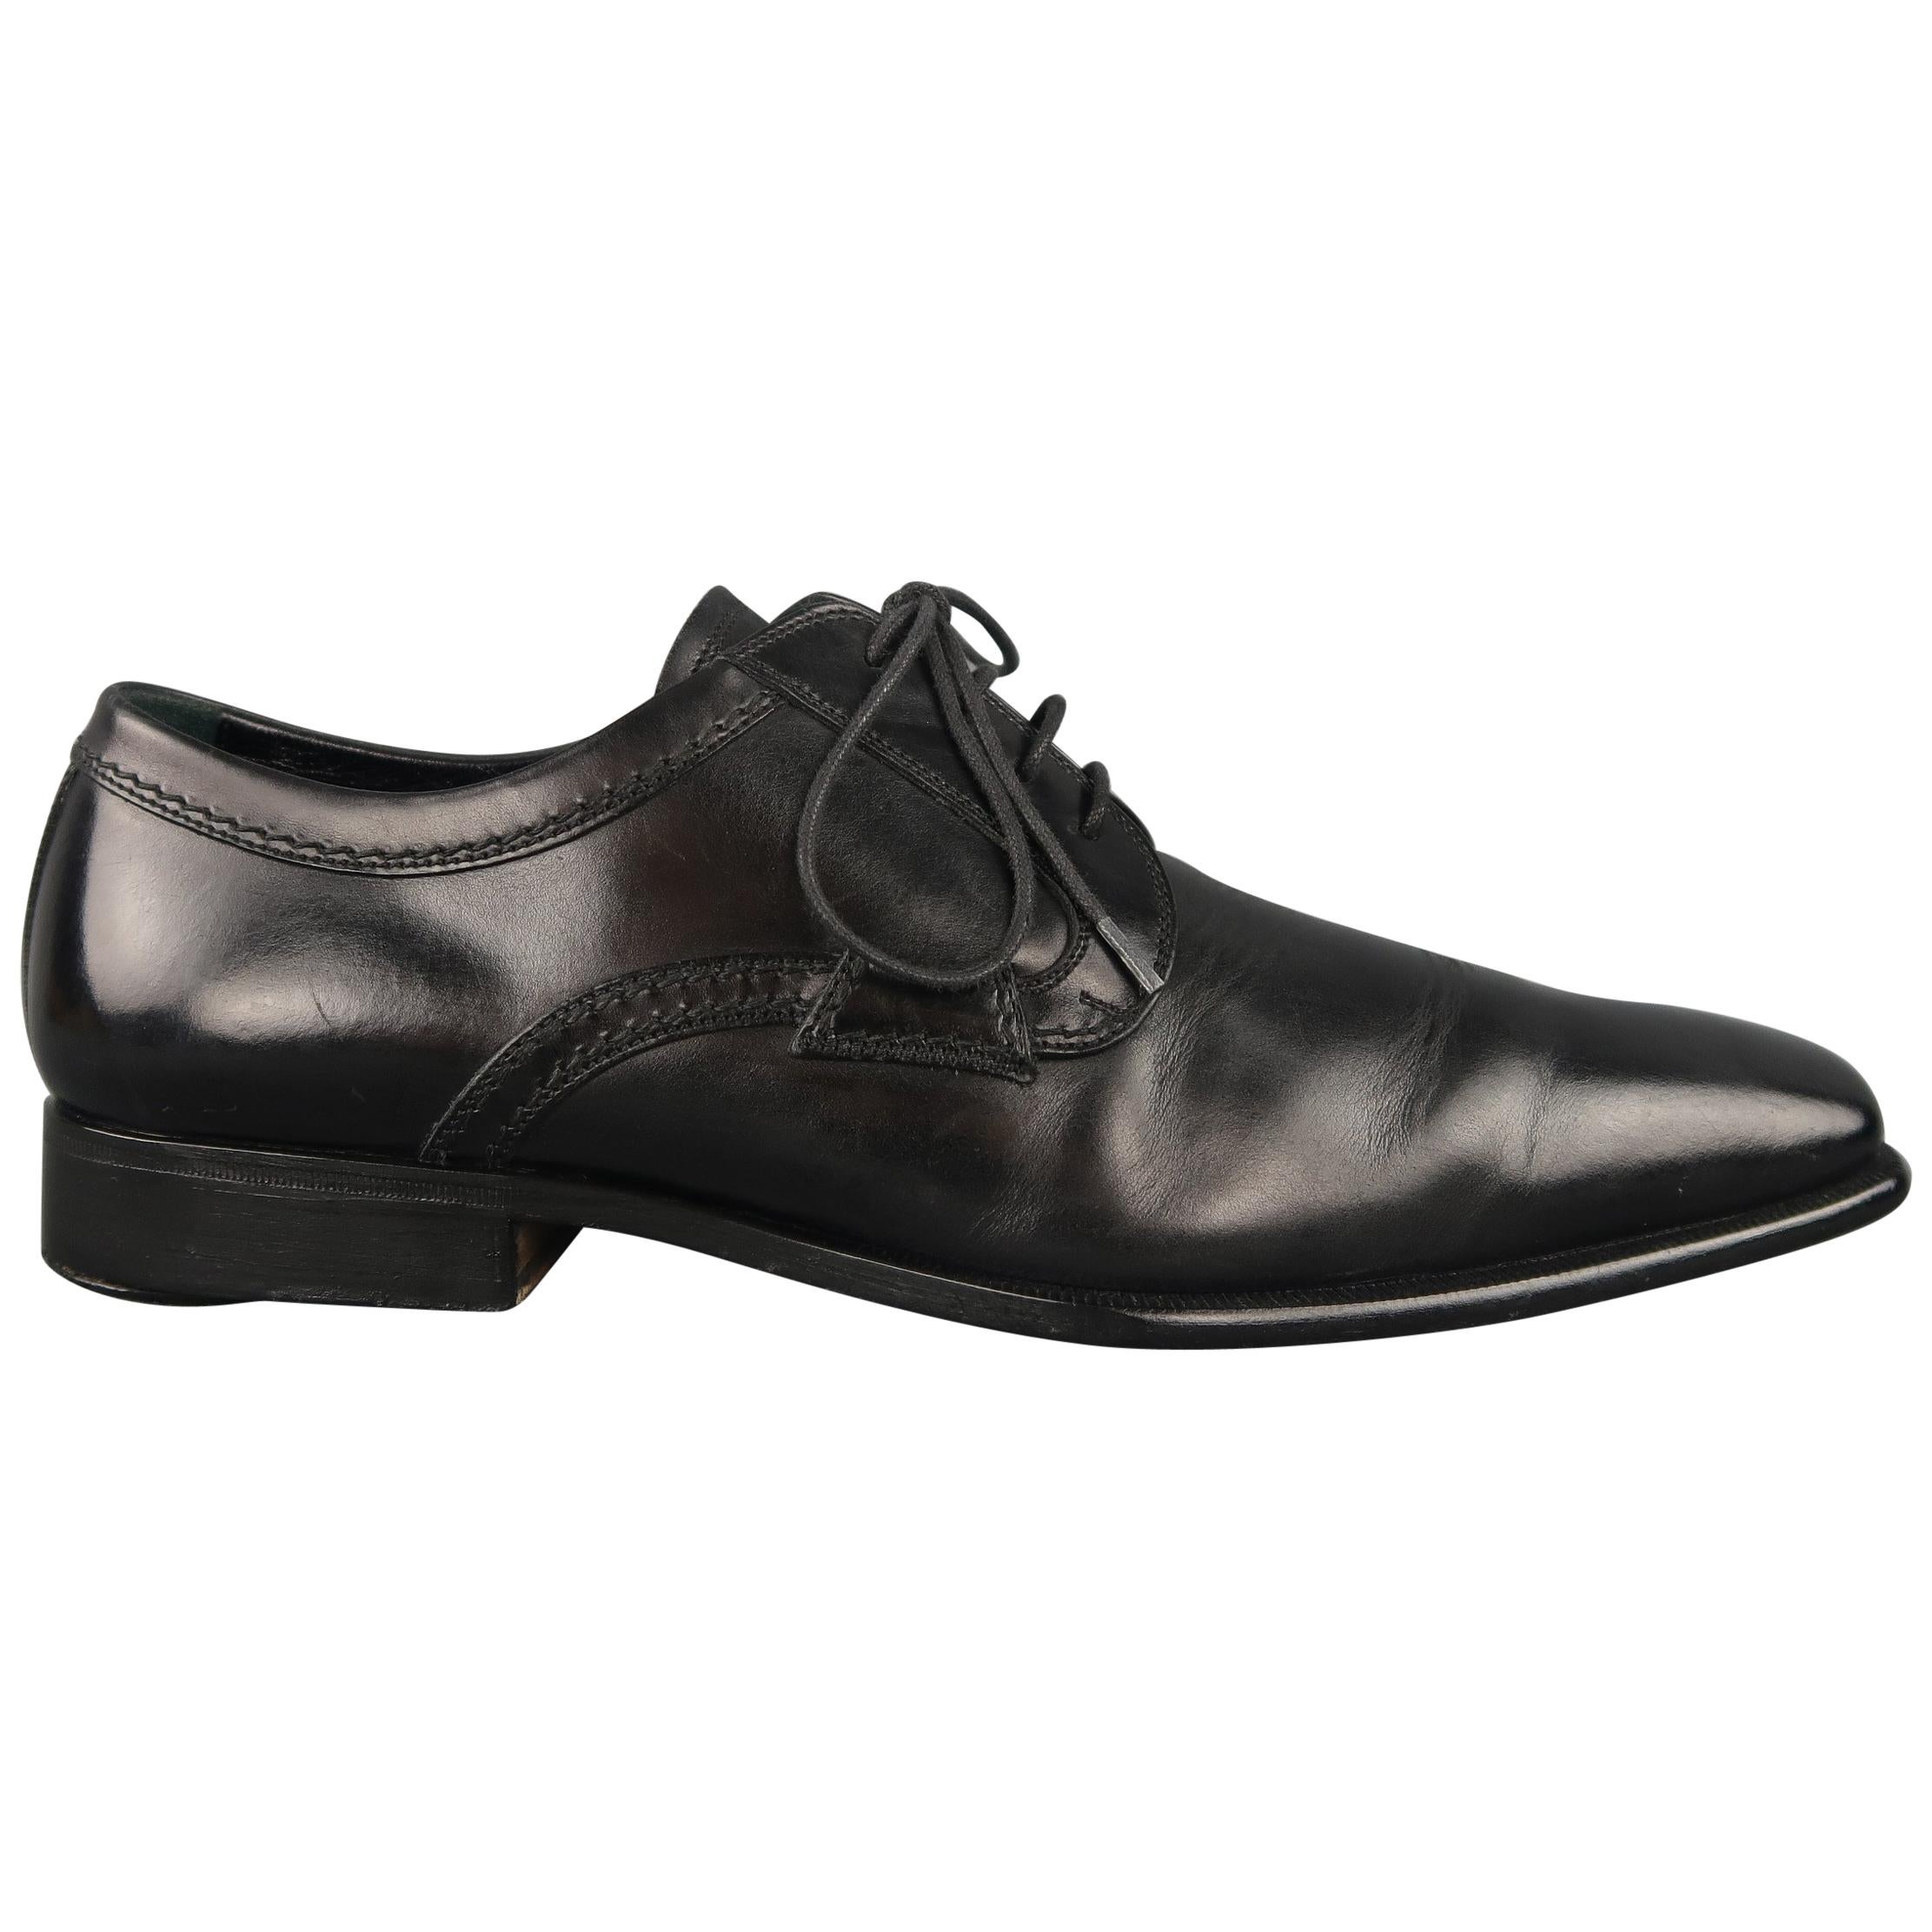 Dolce & Gabbana Black Leather Squared Point Toe Lace Up Dress Shoes